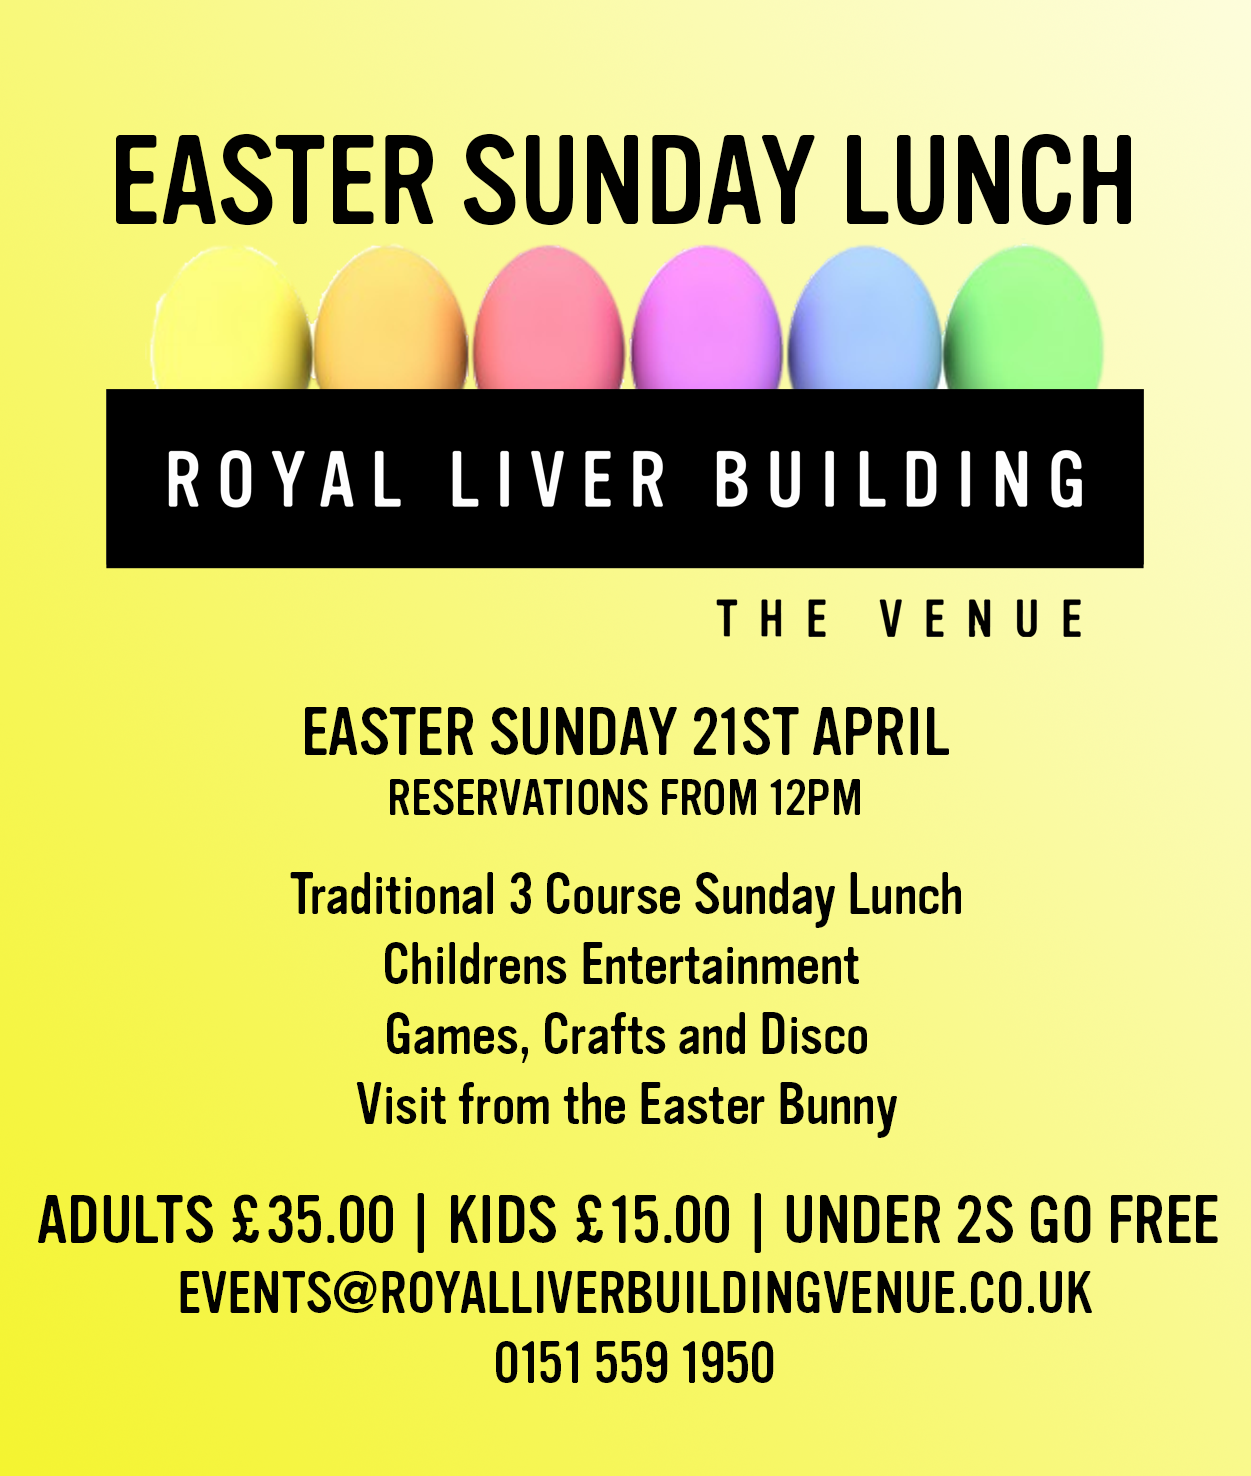 Easter Sunday lunch at the royal liver building